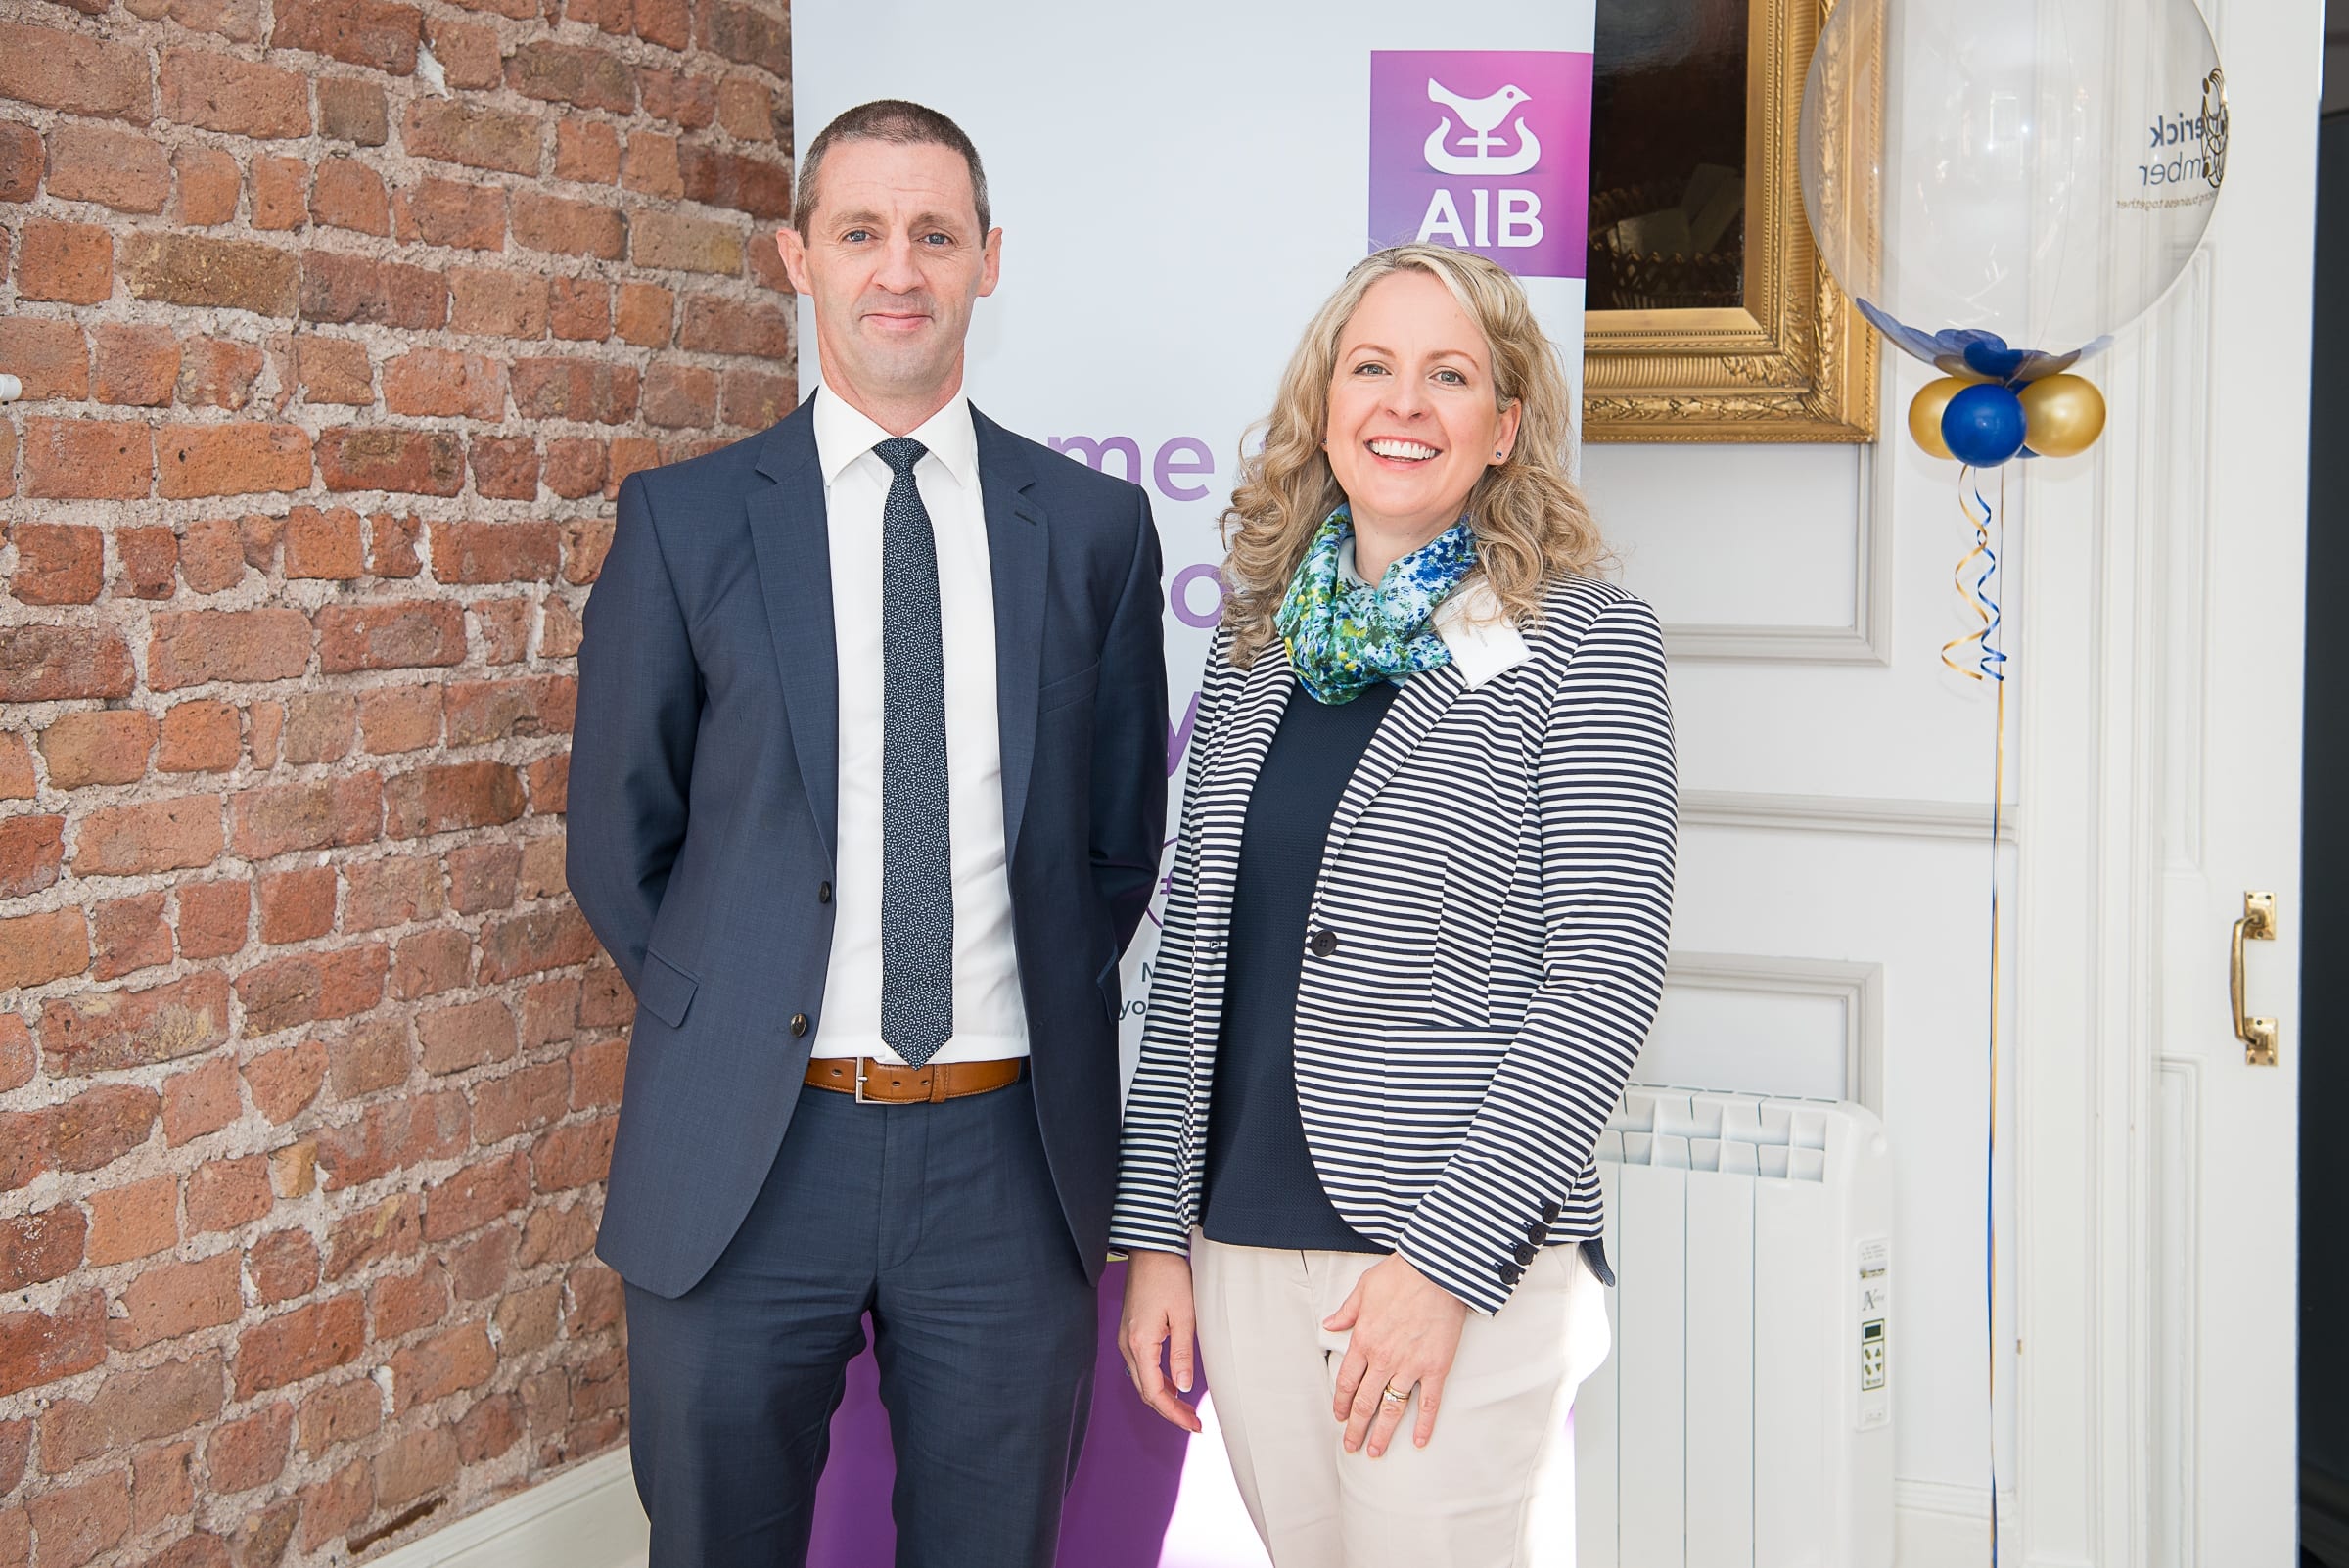 no repro fee- 
From Left to Right:  New Members Breakfast which took place on the 7th June in the Limerick Chamber Boardroom:  Kieran Considine - AIB, Olivia Beck - Olivia Beck Nutrition. 
Photo by Morning Star Photography